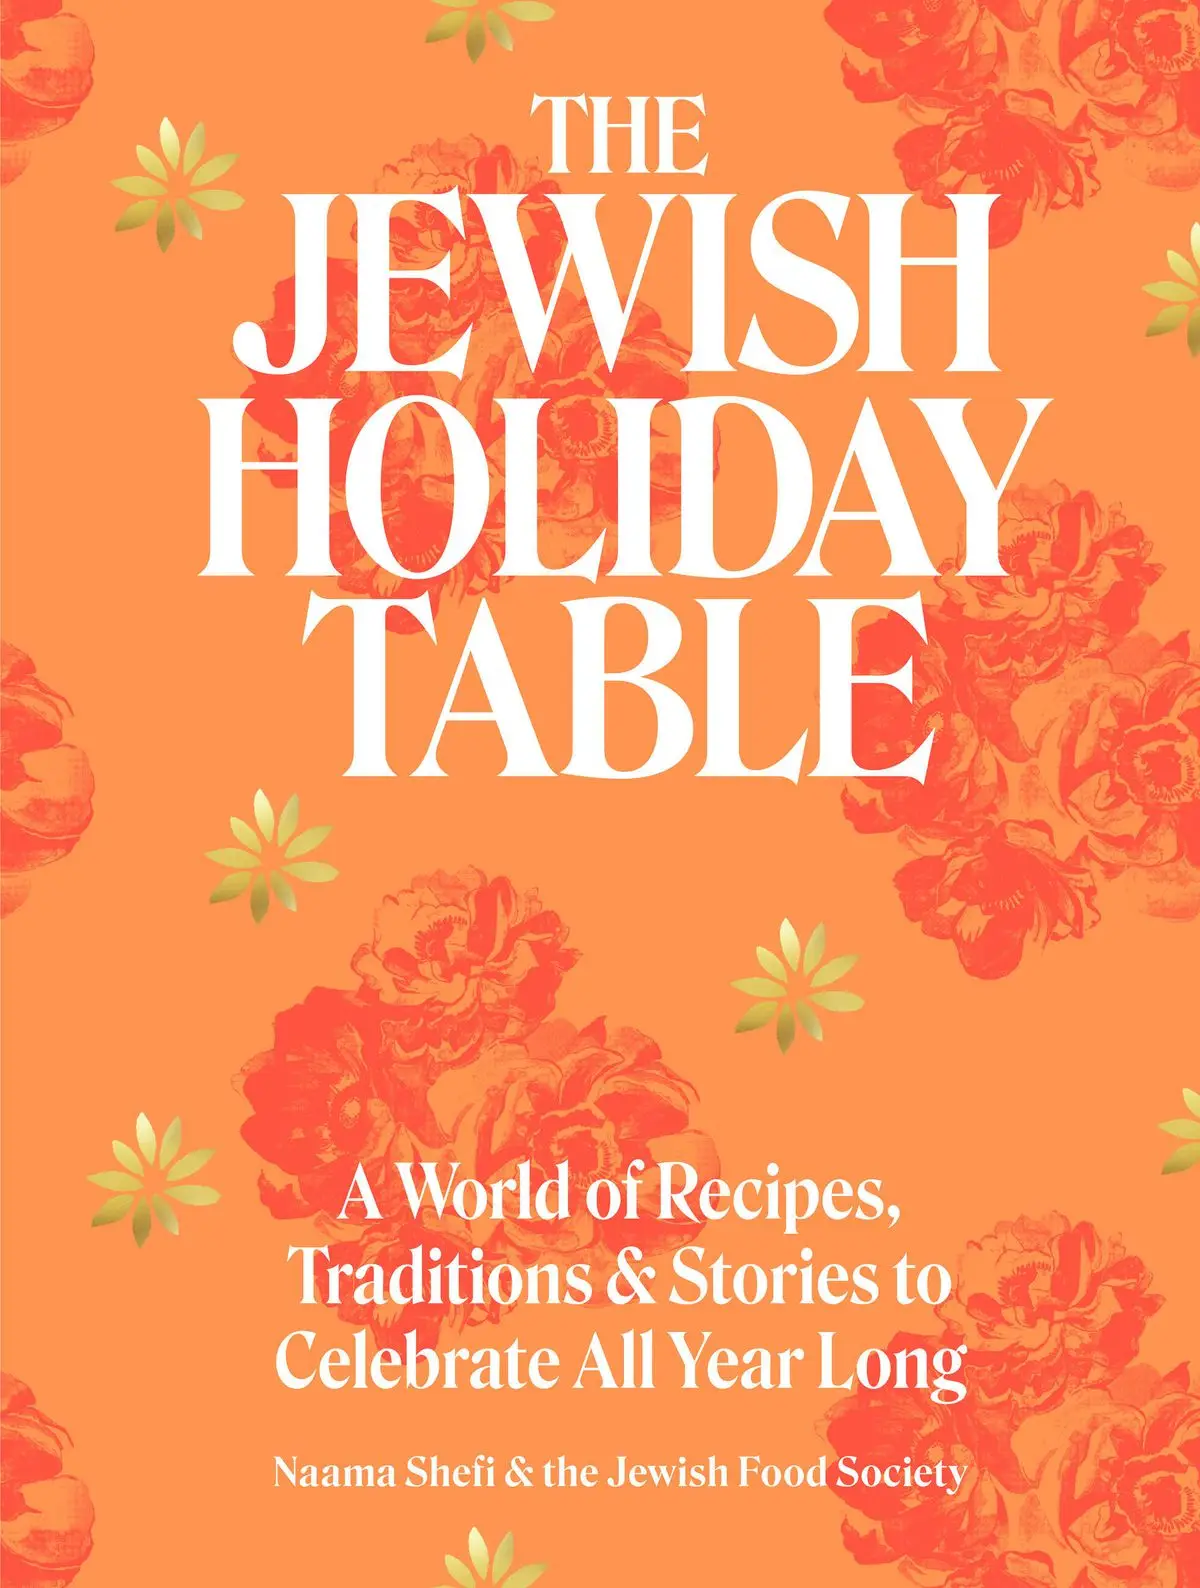 The cover of the Jewish Holiday Table